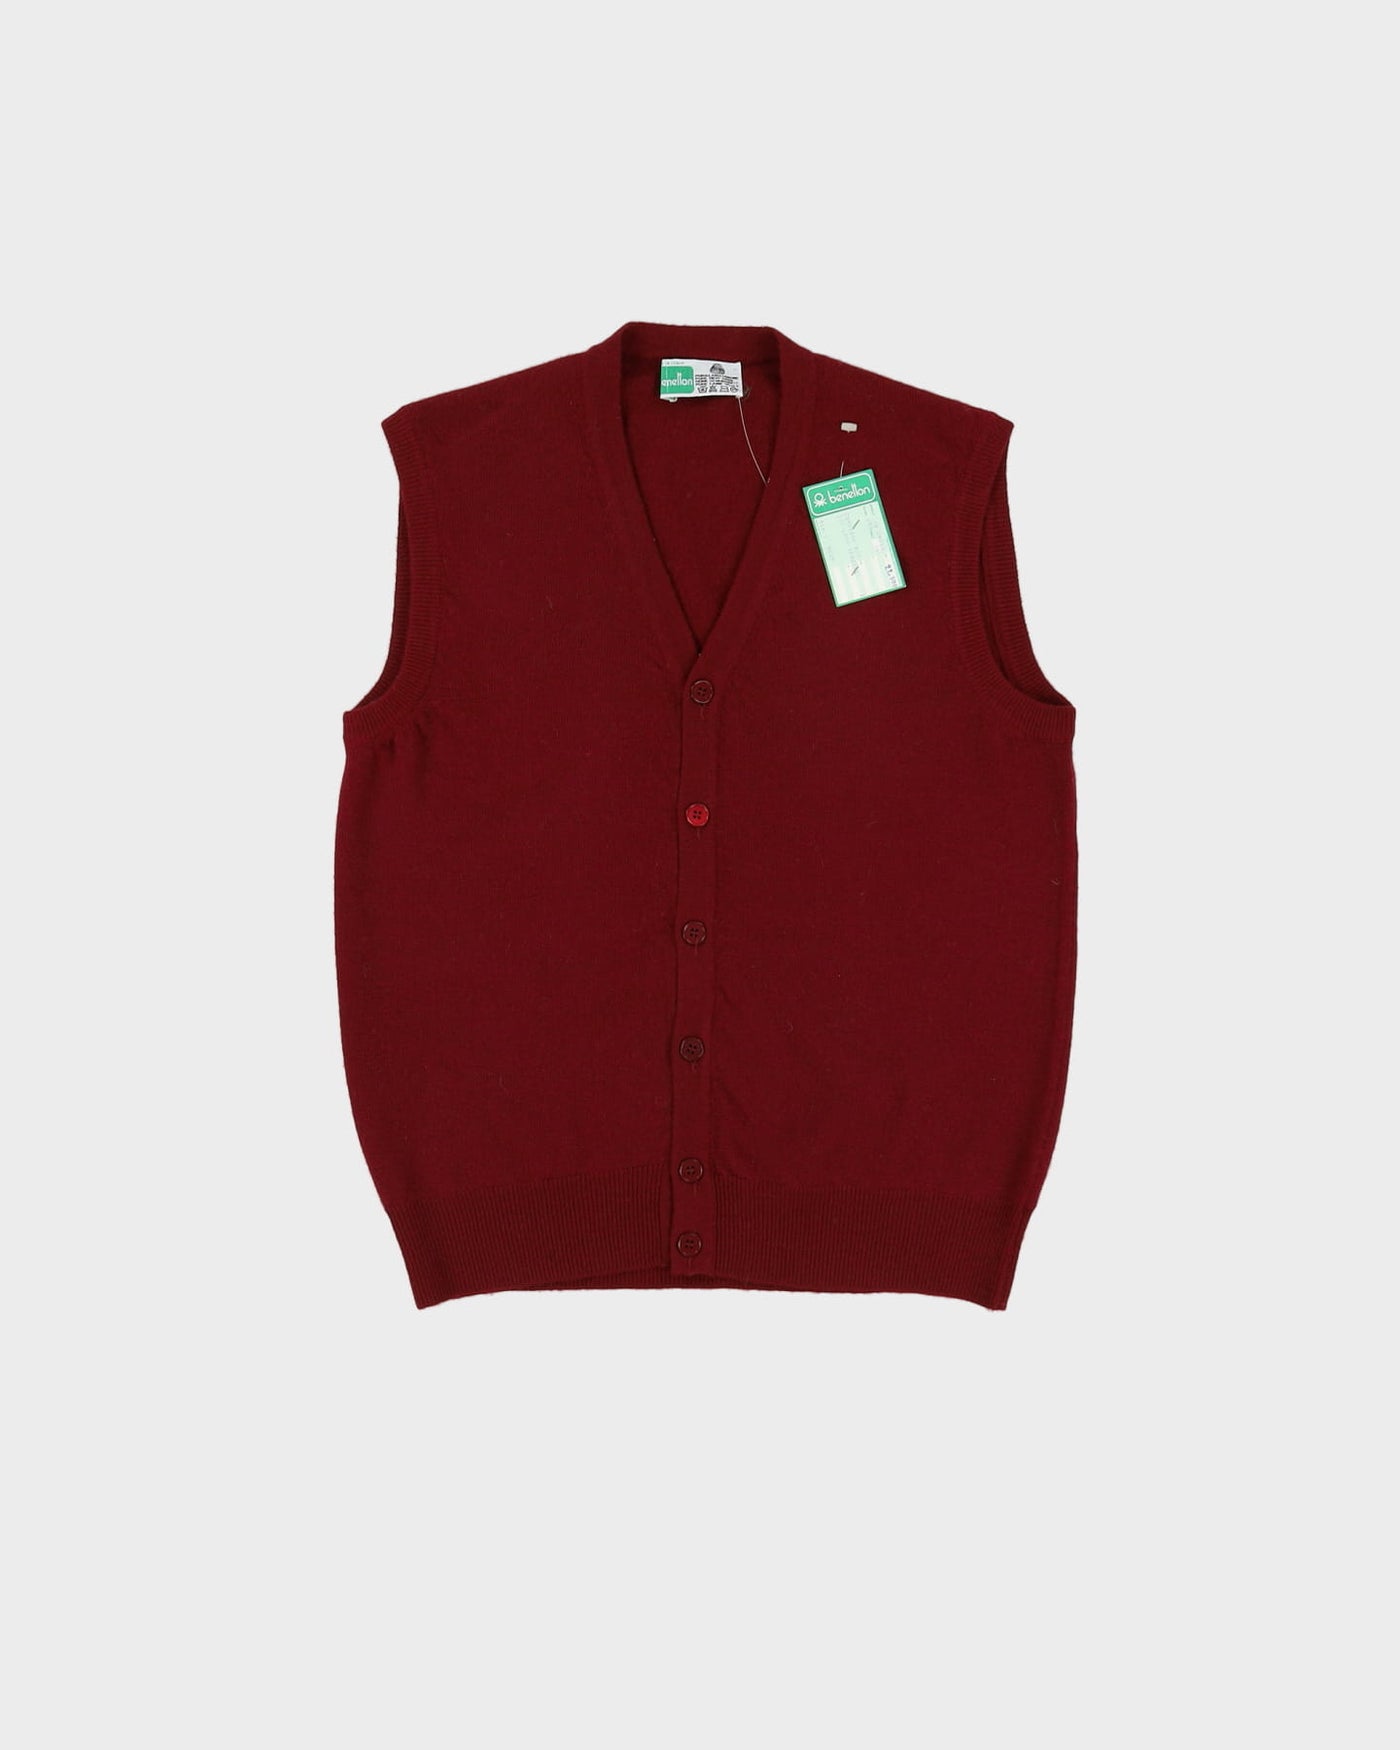 Vintage 70s Deadstock With Tags Benneton Burgundy Cardigan Sweater Vest / Tank Knit - S / M